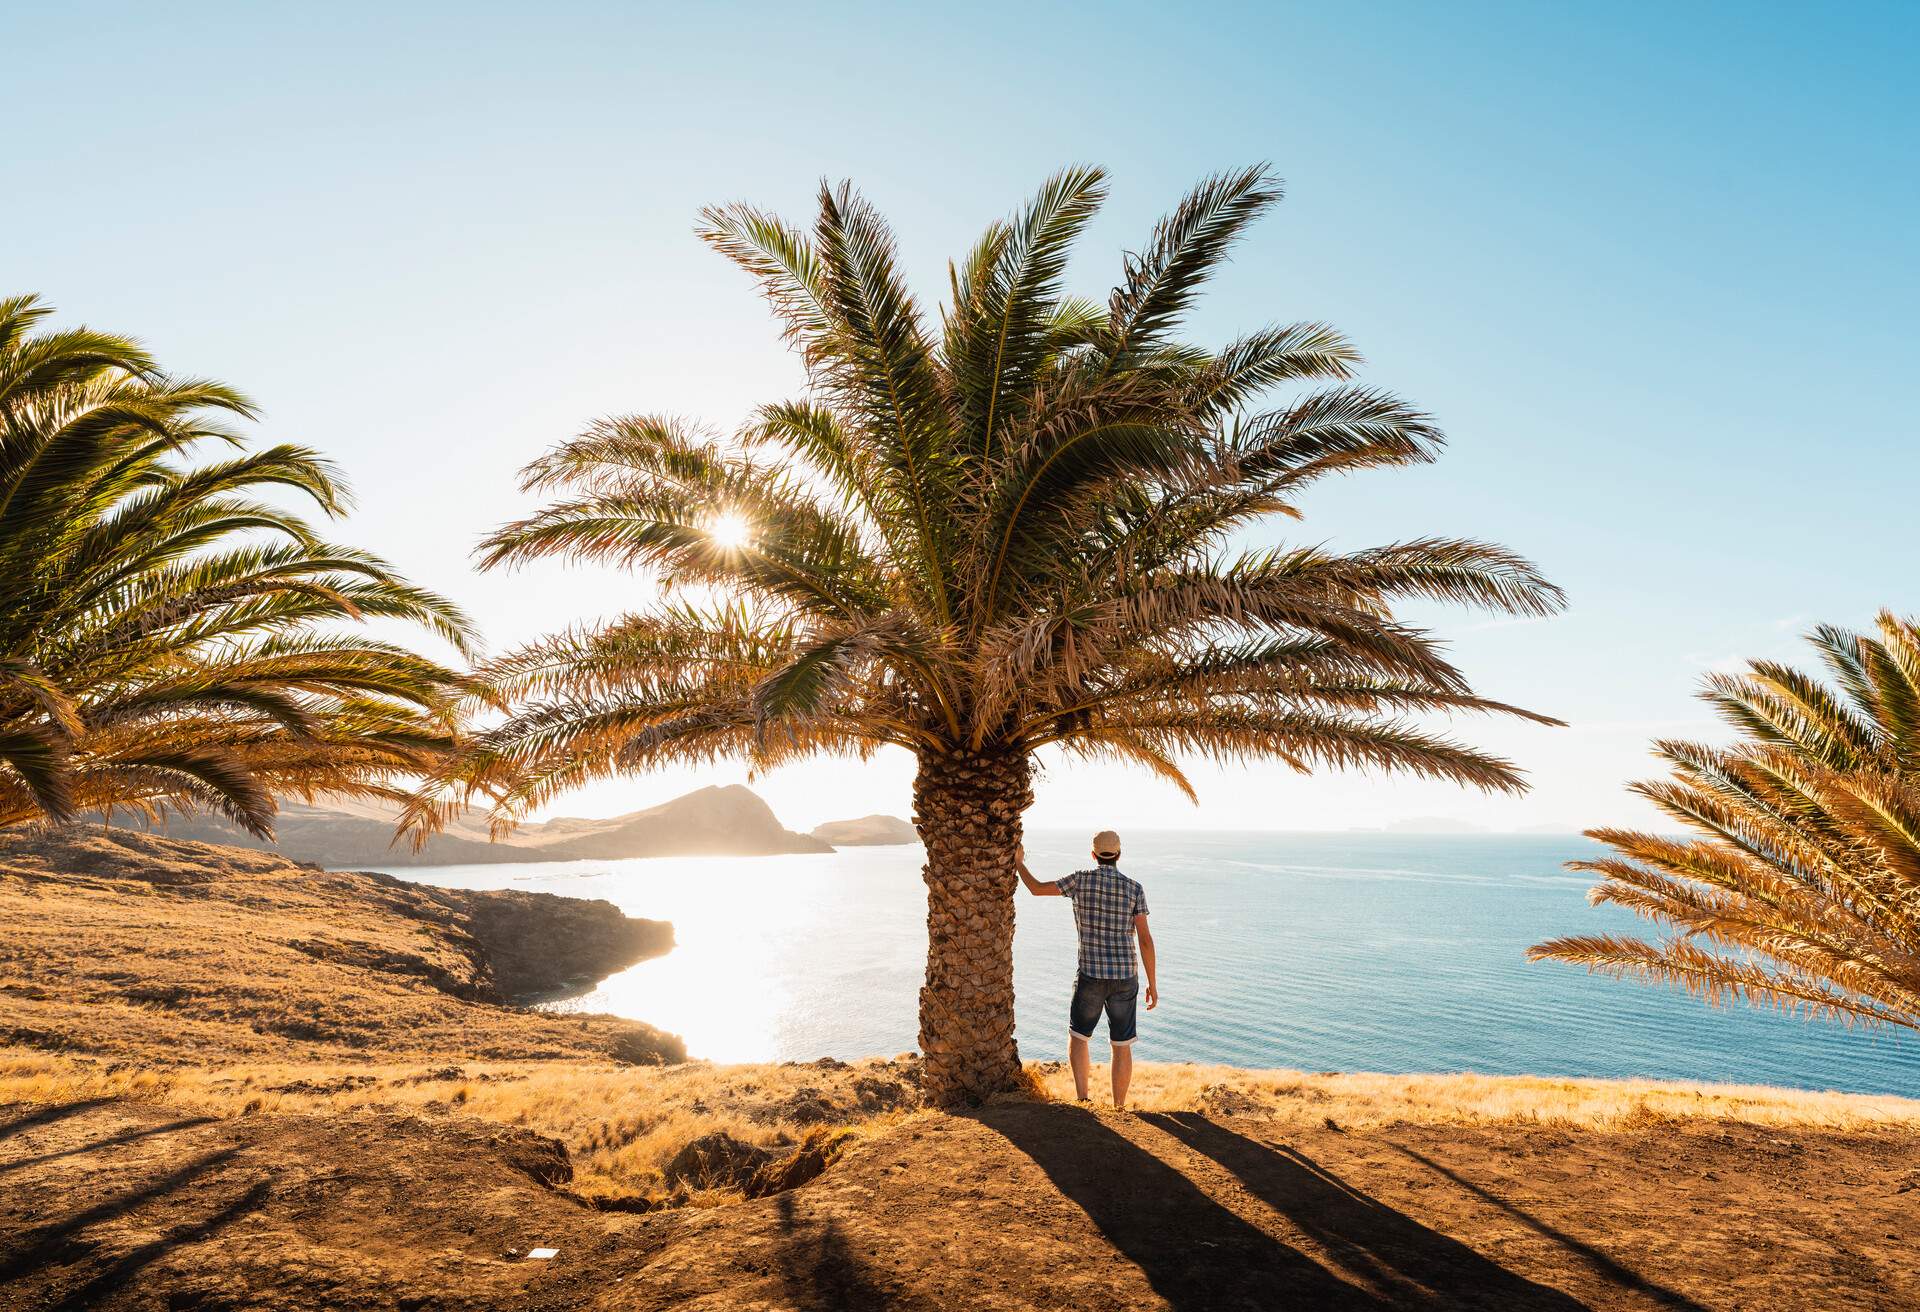 A man standing on the beach with a hand against a palm tree, looking across the ocean.